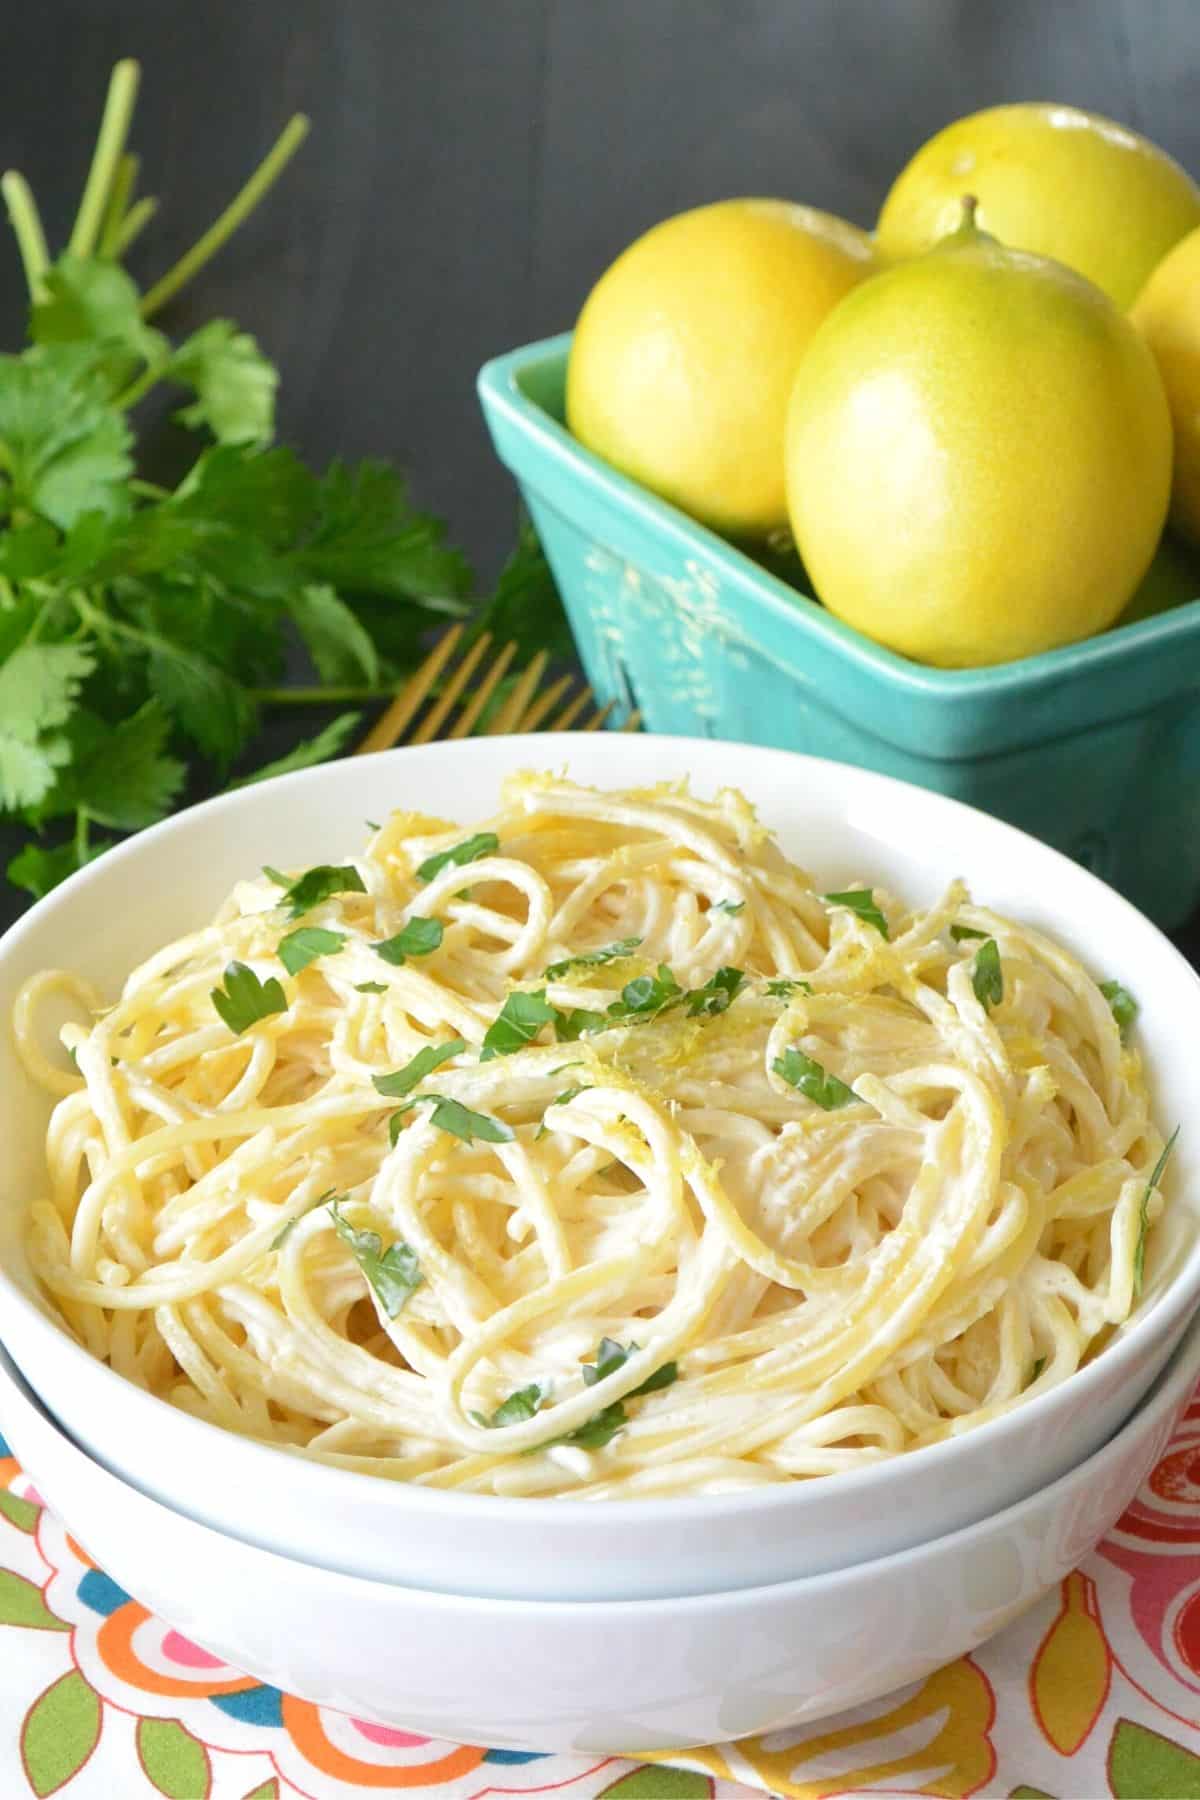 White bowl of pasta with aqua basket of lemons and bunch of parsley in the background